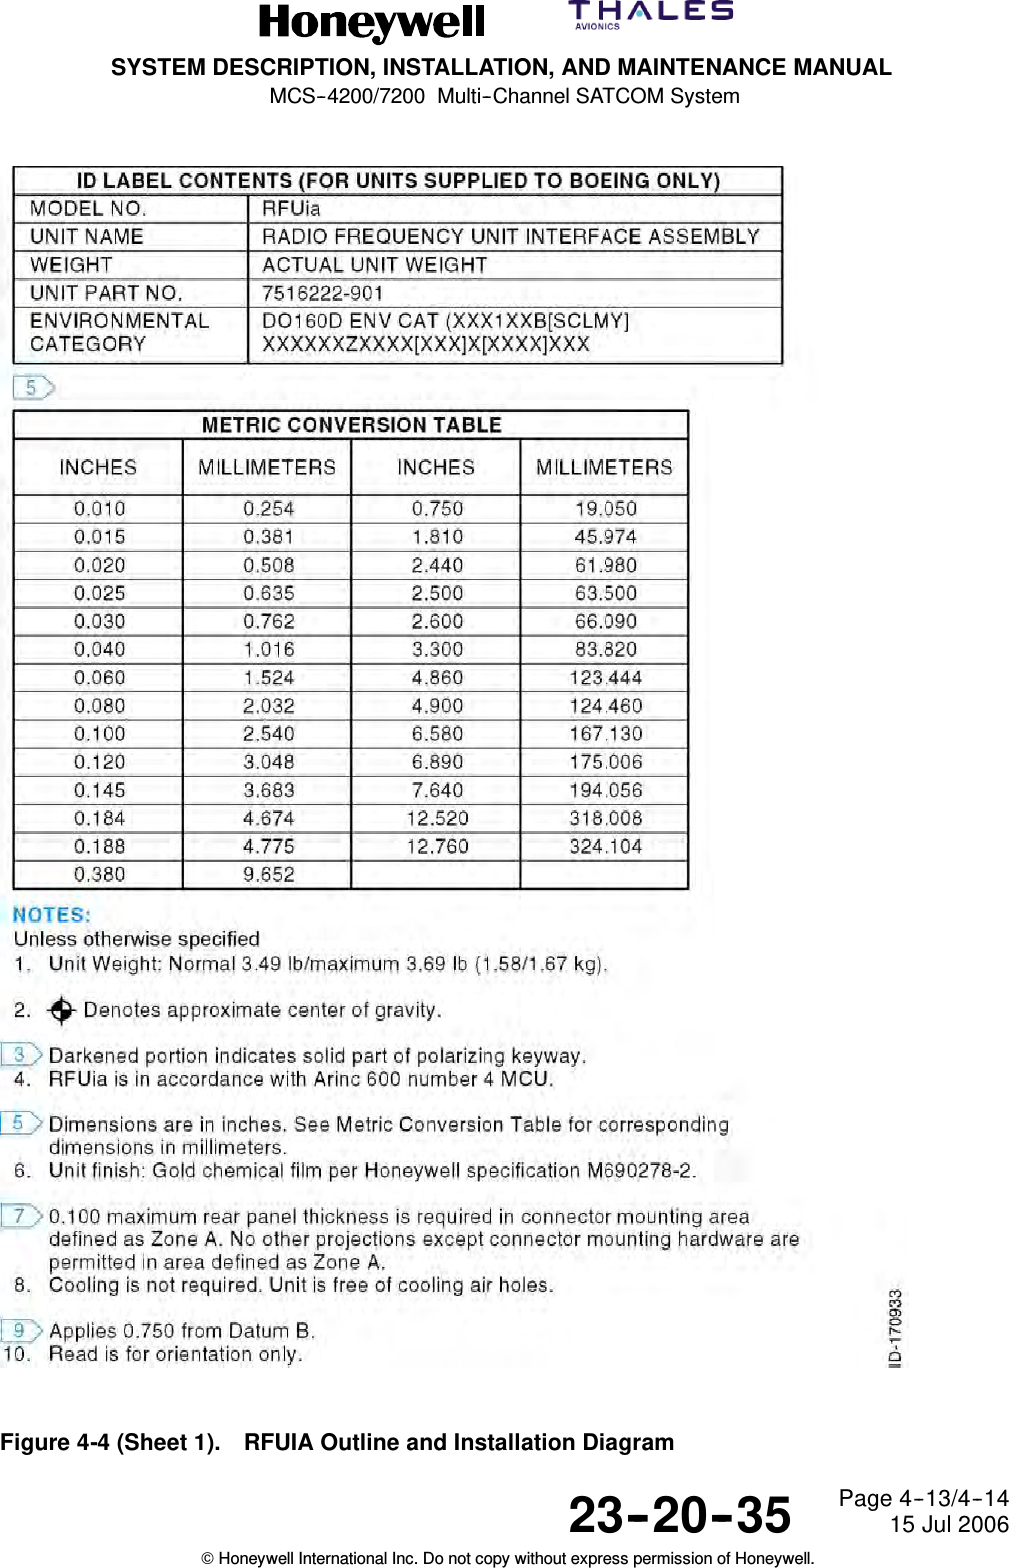 SYSTEM DESCRIPTION, INSTALLATION, AND MAINTENANCE MANUALMCS--4200/7200 Multi--Channel SATCOM System23--20--35 15 Jul 2006Honeywell International Inc. Do not copy without express permission of Honeywell.Page 4--13/4--14Figure 4-4 (Sheet 1). RFUIA Outline and Installation Diagram